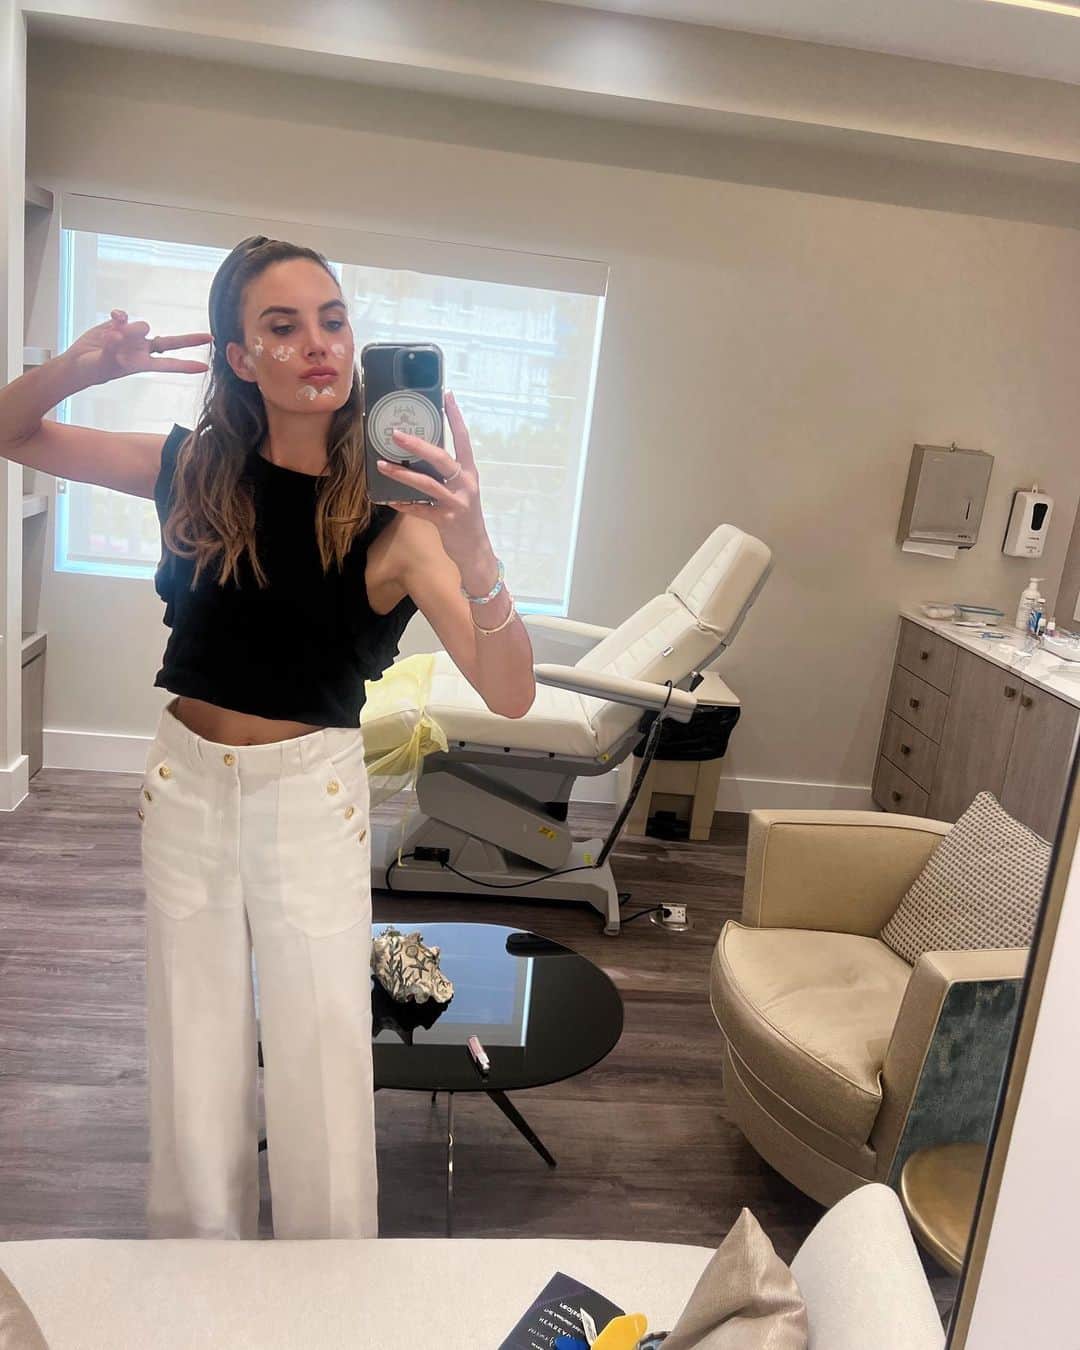 Elizabeth Chambers Hammerのインスタグラム：「Came for the prophilo, stayed for the lighting. Work/life has been wild but sharing some recent wellness and moments of sanity⚡️  1. Profhilo for improved skin texture and hydration @aventiscayman. More info about it in my @marieclairemag article.  2. Hyberbaric Chamber for immunity @willofwellnesscayman. 3. NAD infusion with glutathione push for improved cellular function and  anti-aging, skin glow and improved liver function @pensum_regenerative  4.  Carbon Q-switch laser for pigmentation/even skin tone and  @looks.ky  5. @cledepeaubeauteus SPF 50 bc I live in the sun and love the texture 6. Endospheres Therapy for lymphatic/improved circulation @endospheres_cayman  7. @hanacure mask for looking snatched. Also supposed to help with hyperpigmentation. Not an ad/treatments not gifted, just what’s working for me lately xx」